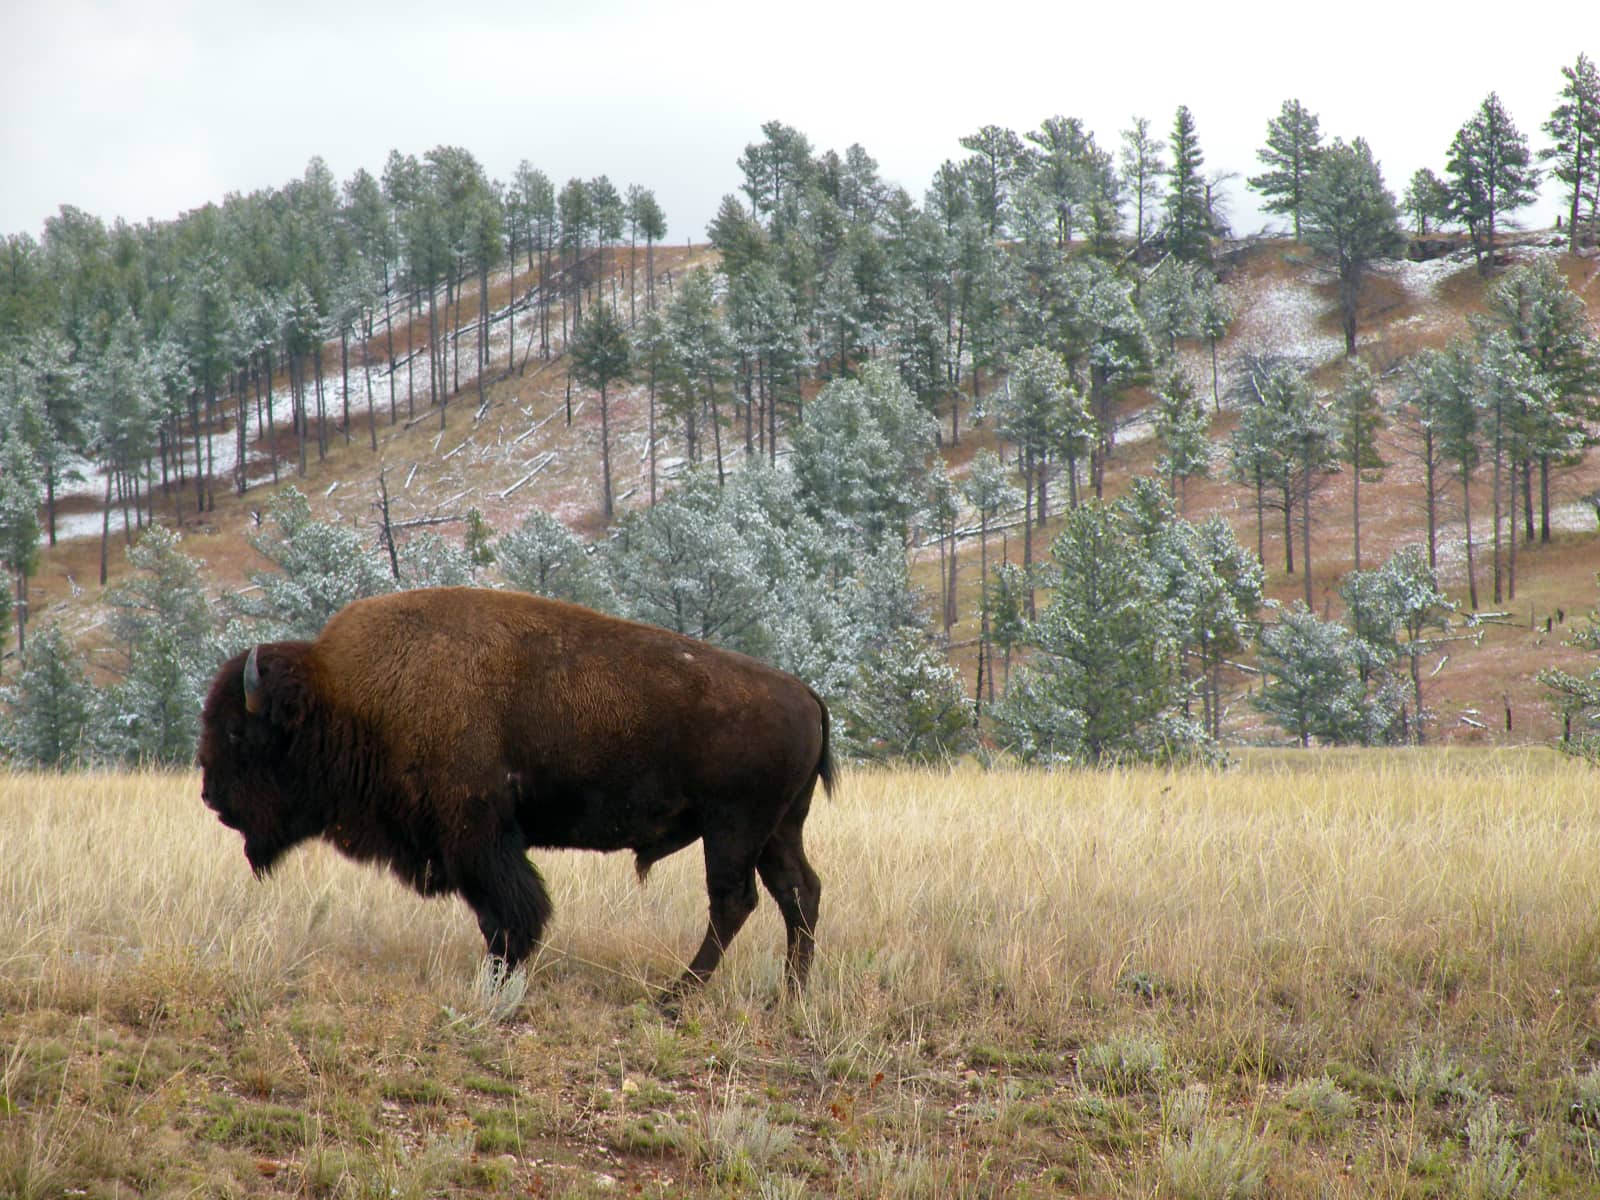 Lone bison standing in foreground with trees in background